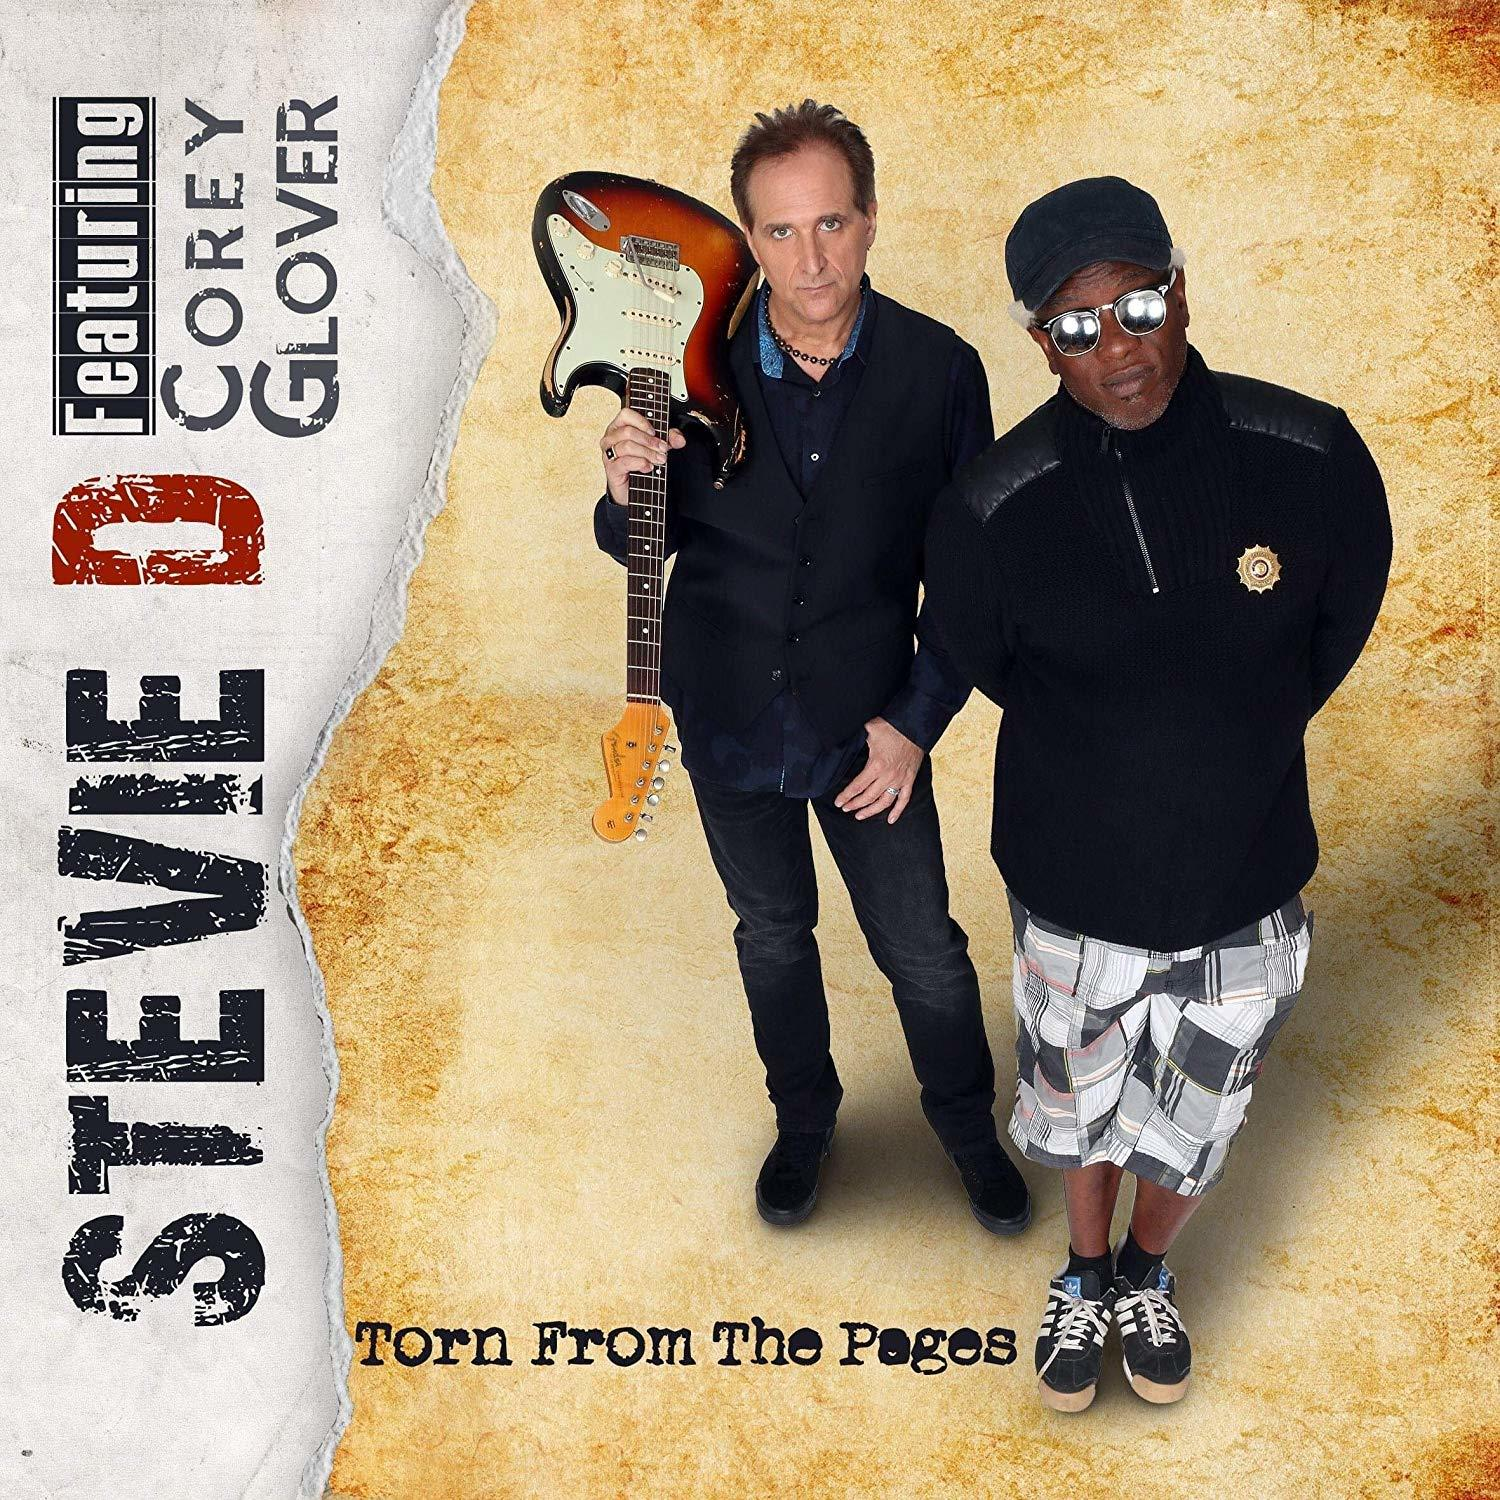 (CD) - Torn The Pages Stevie From Glover - Cory D,